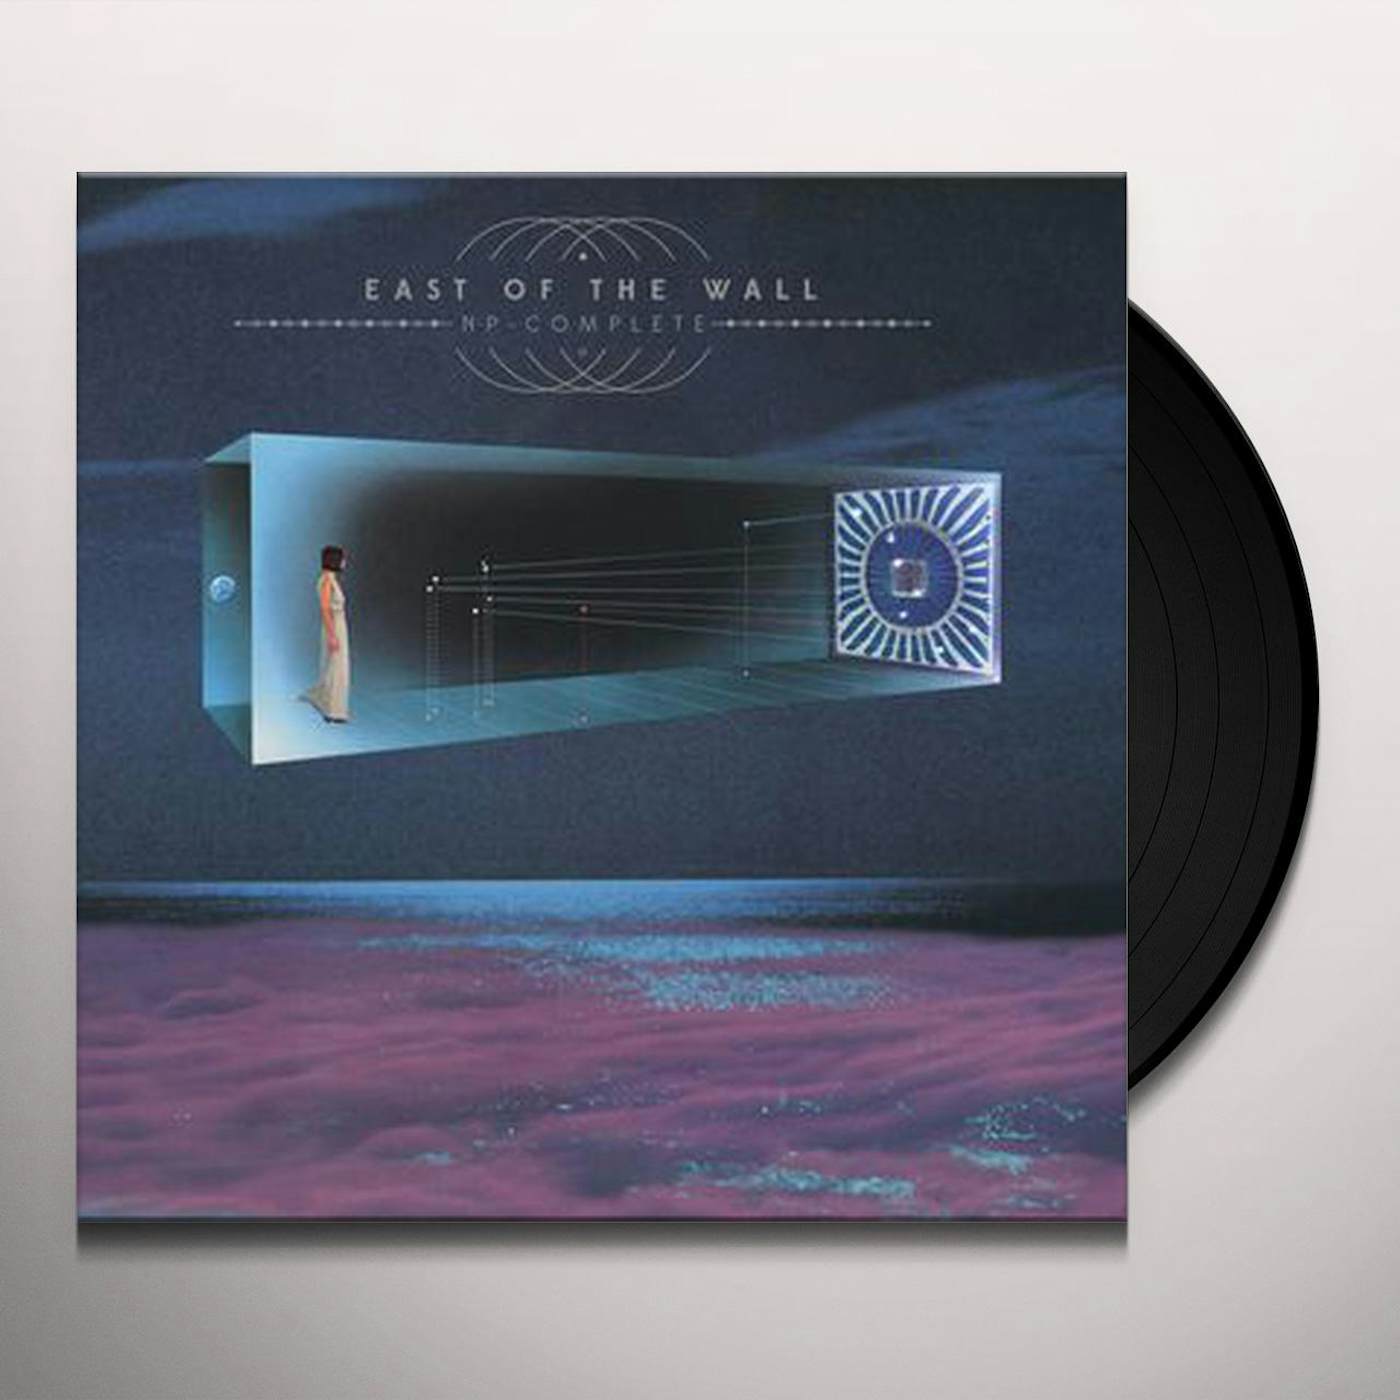 East Of The Wall NP-Complete Vinyl Record